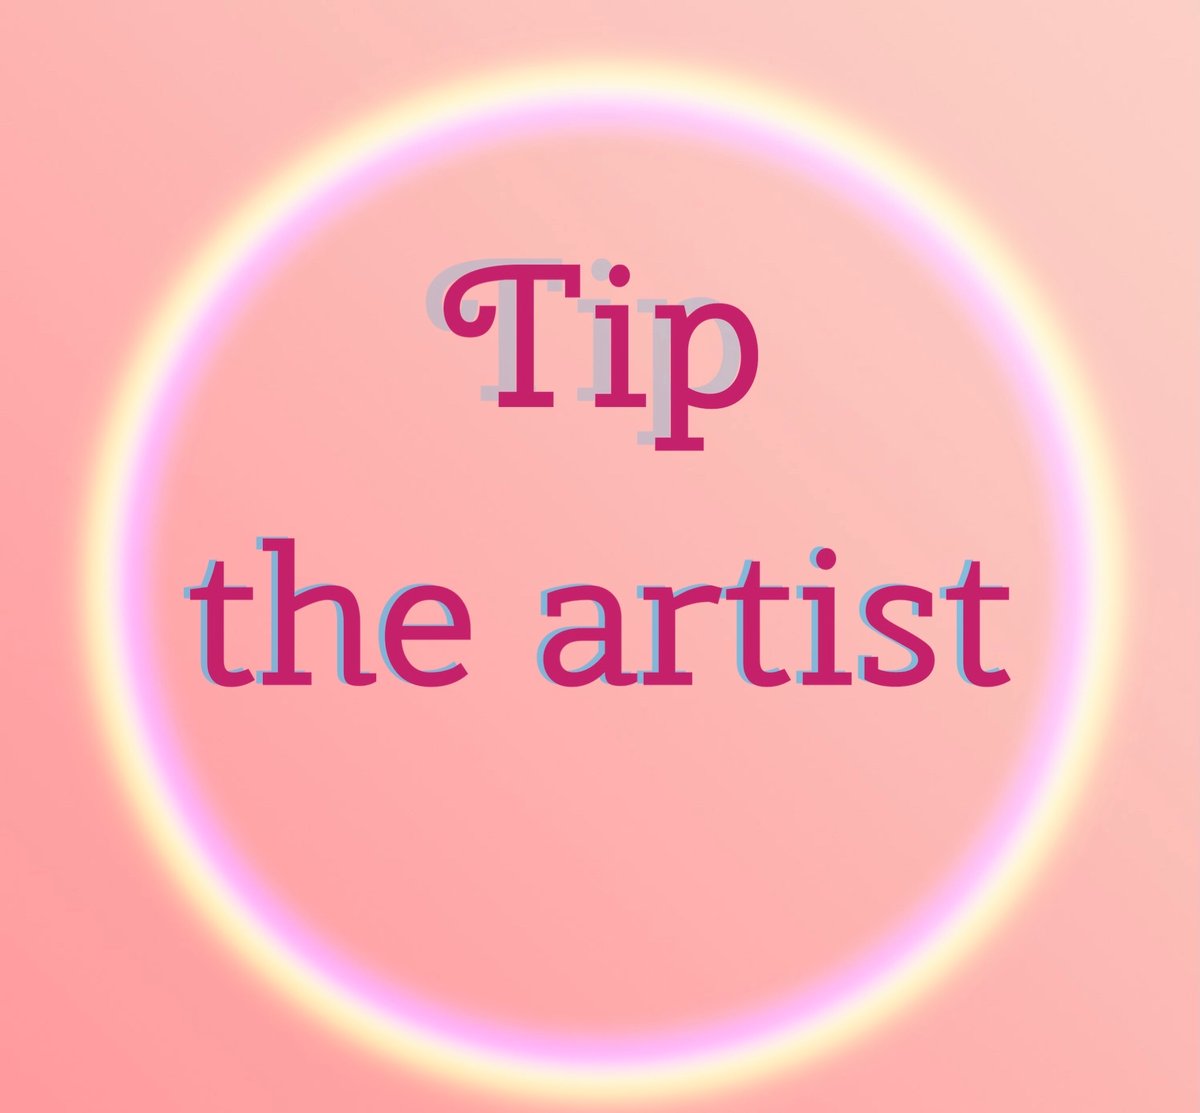 Image of Tip the artist 